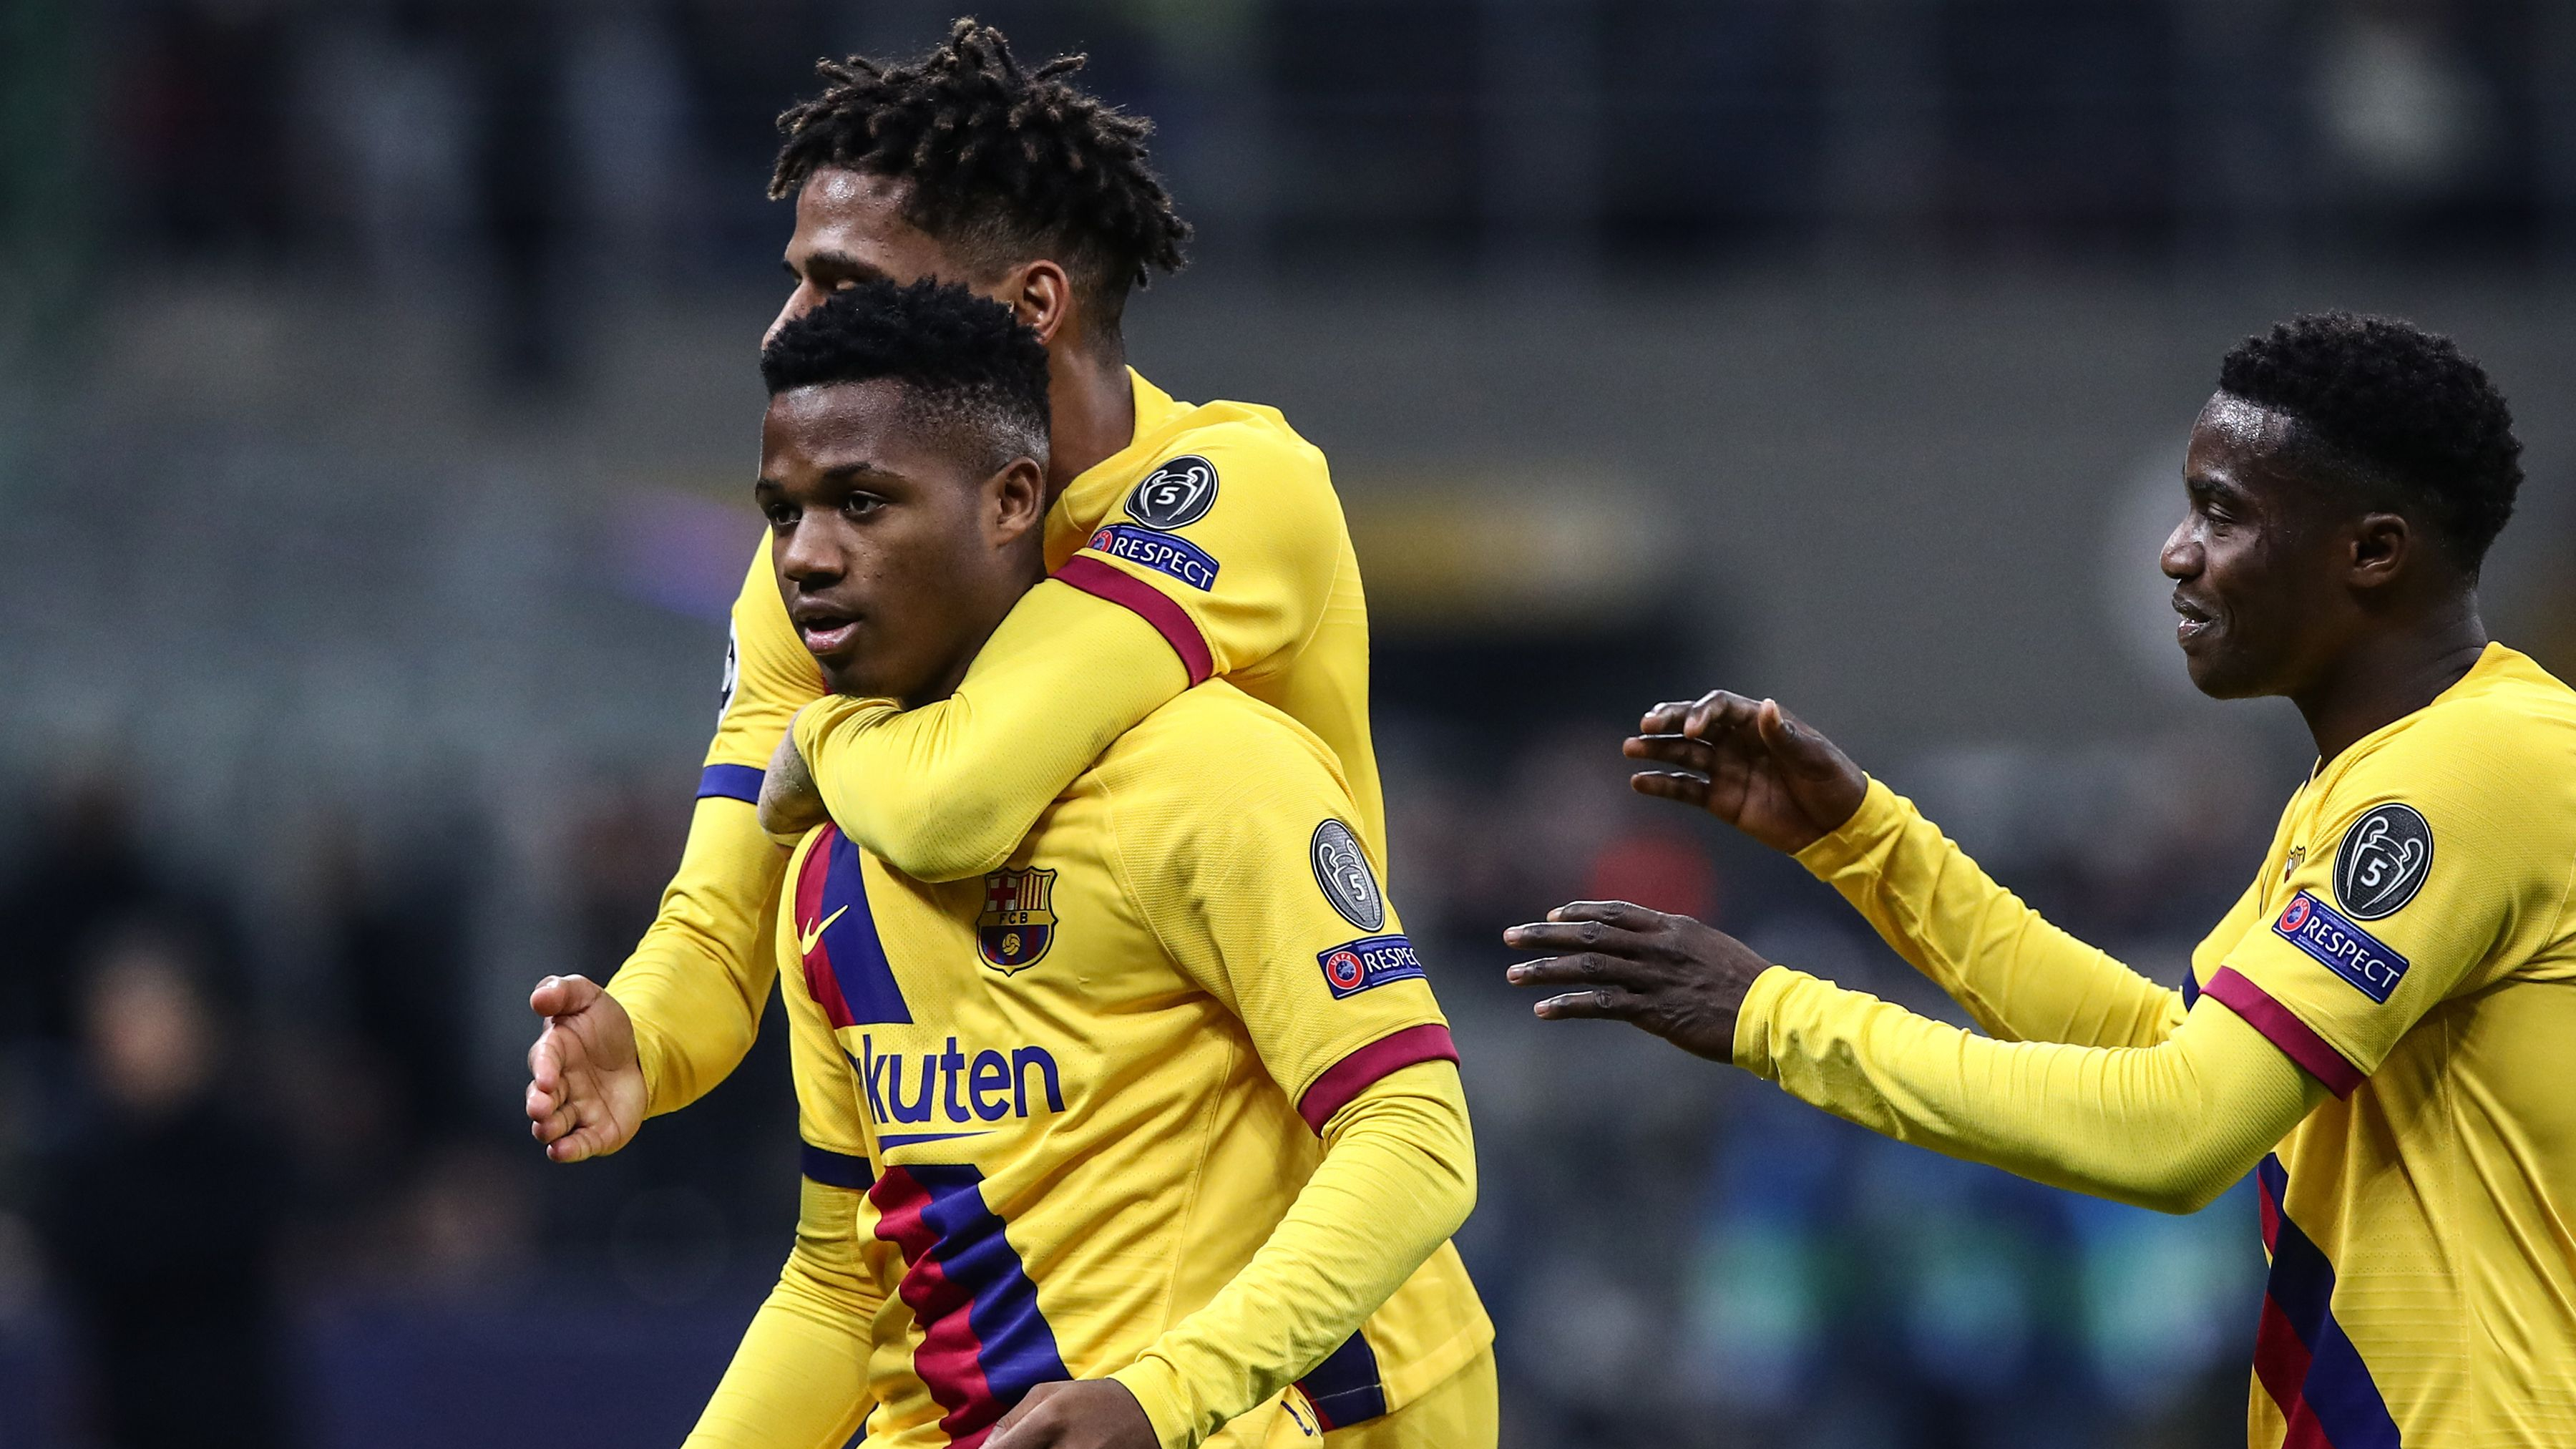 Fati becomes youngest ever Champions League goalscorer in Barcelona win